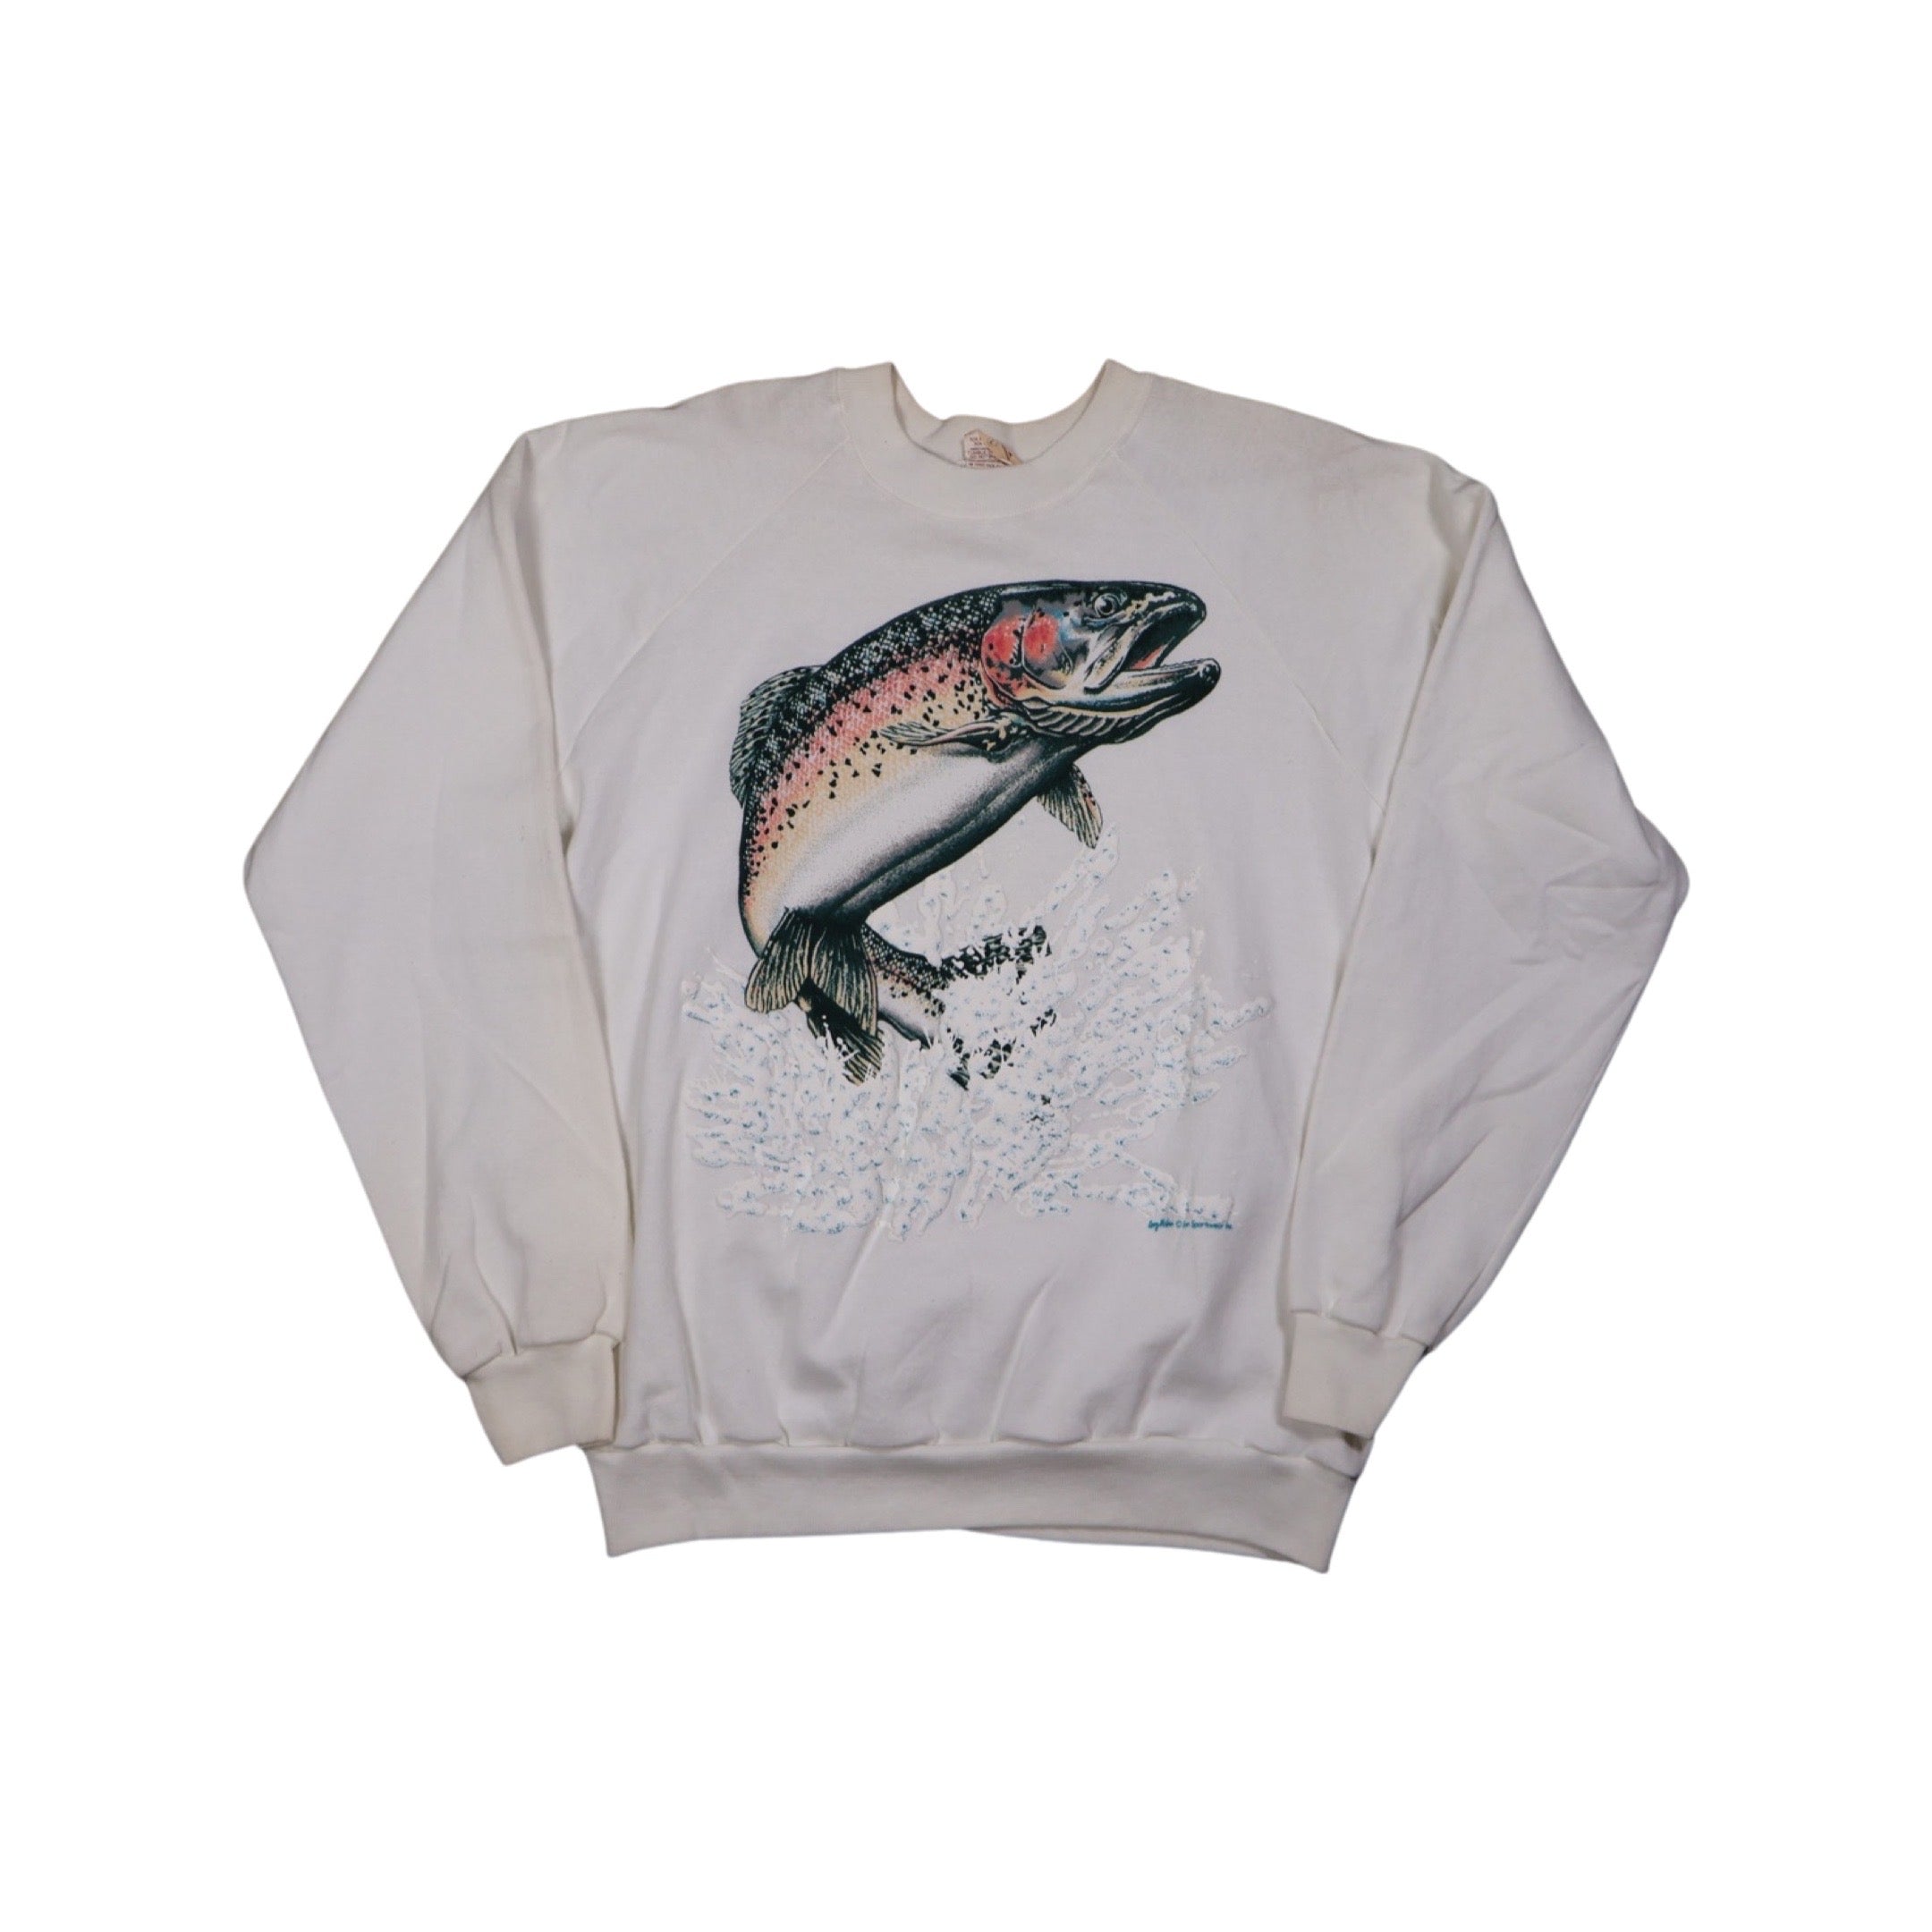 Trout 80s Sweater (Large)